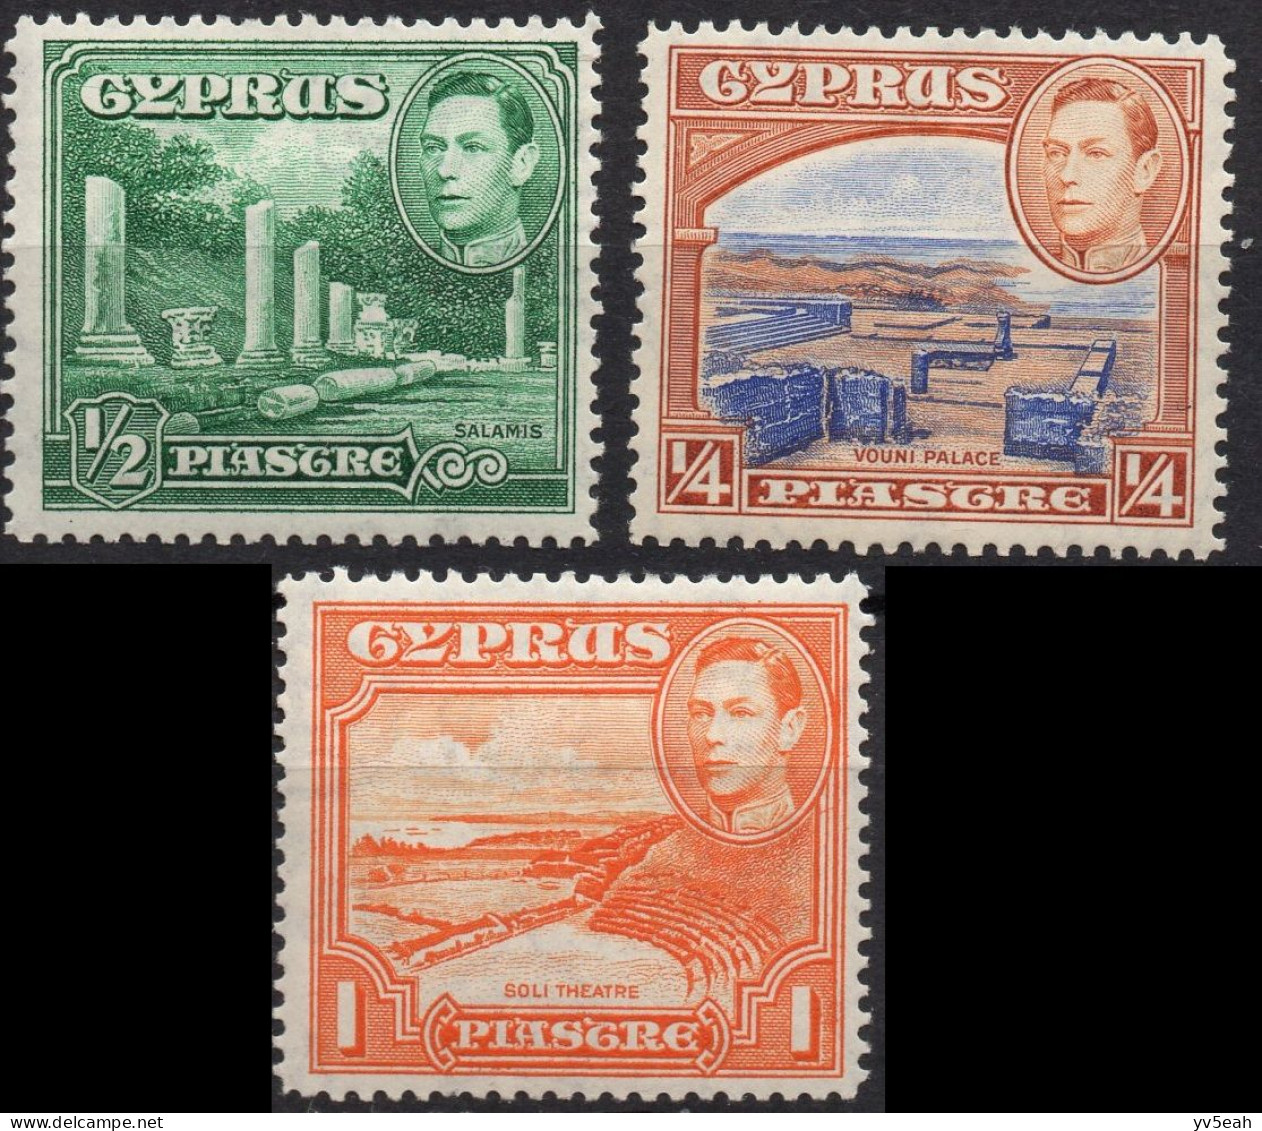 CYPRUS/1938-44/MH/SC#143-4, 146/ OLD ARCHITECTURE / BUILDINGS / PICTORIAL / KING GEORGE VI / KGVI / PARTIAL SET - Chipre (...-1960)